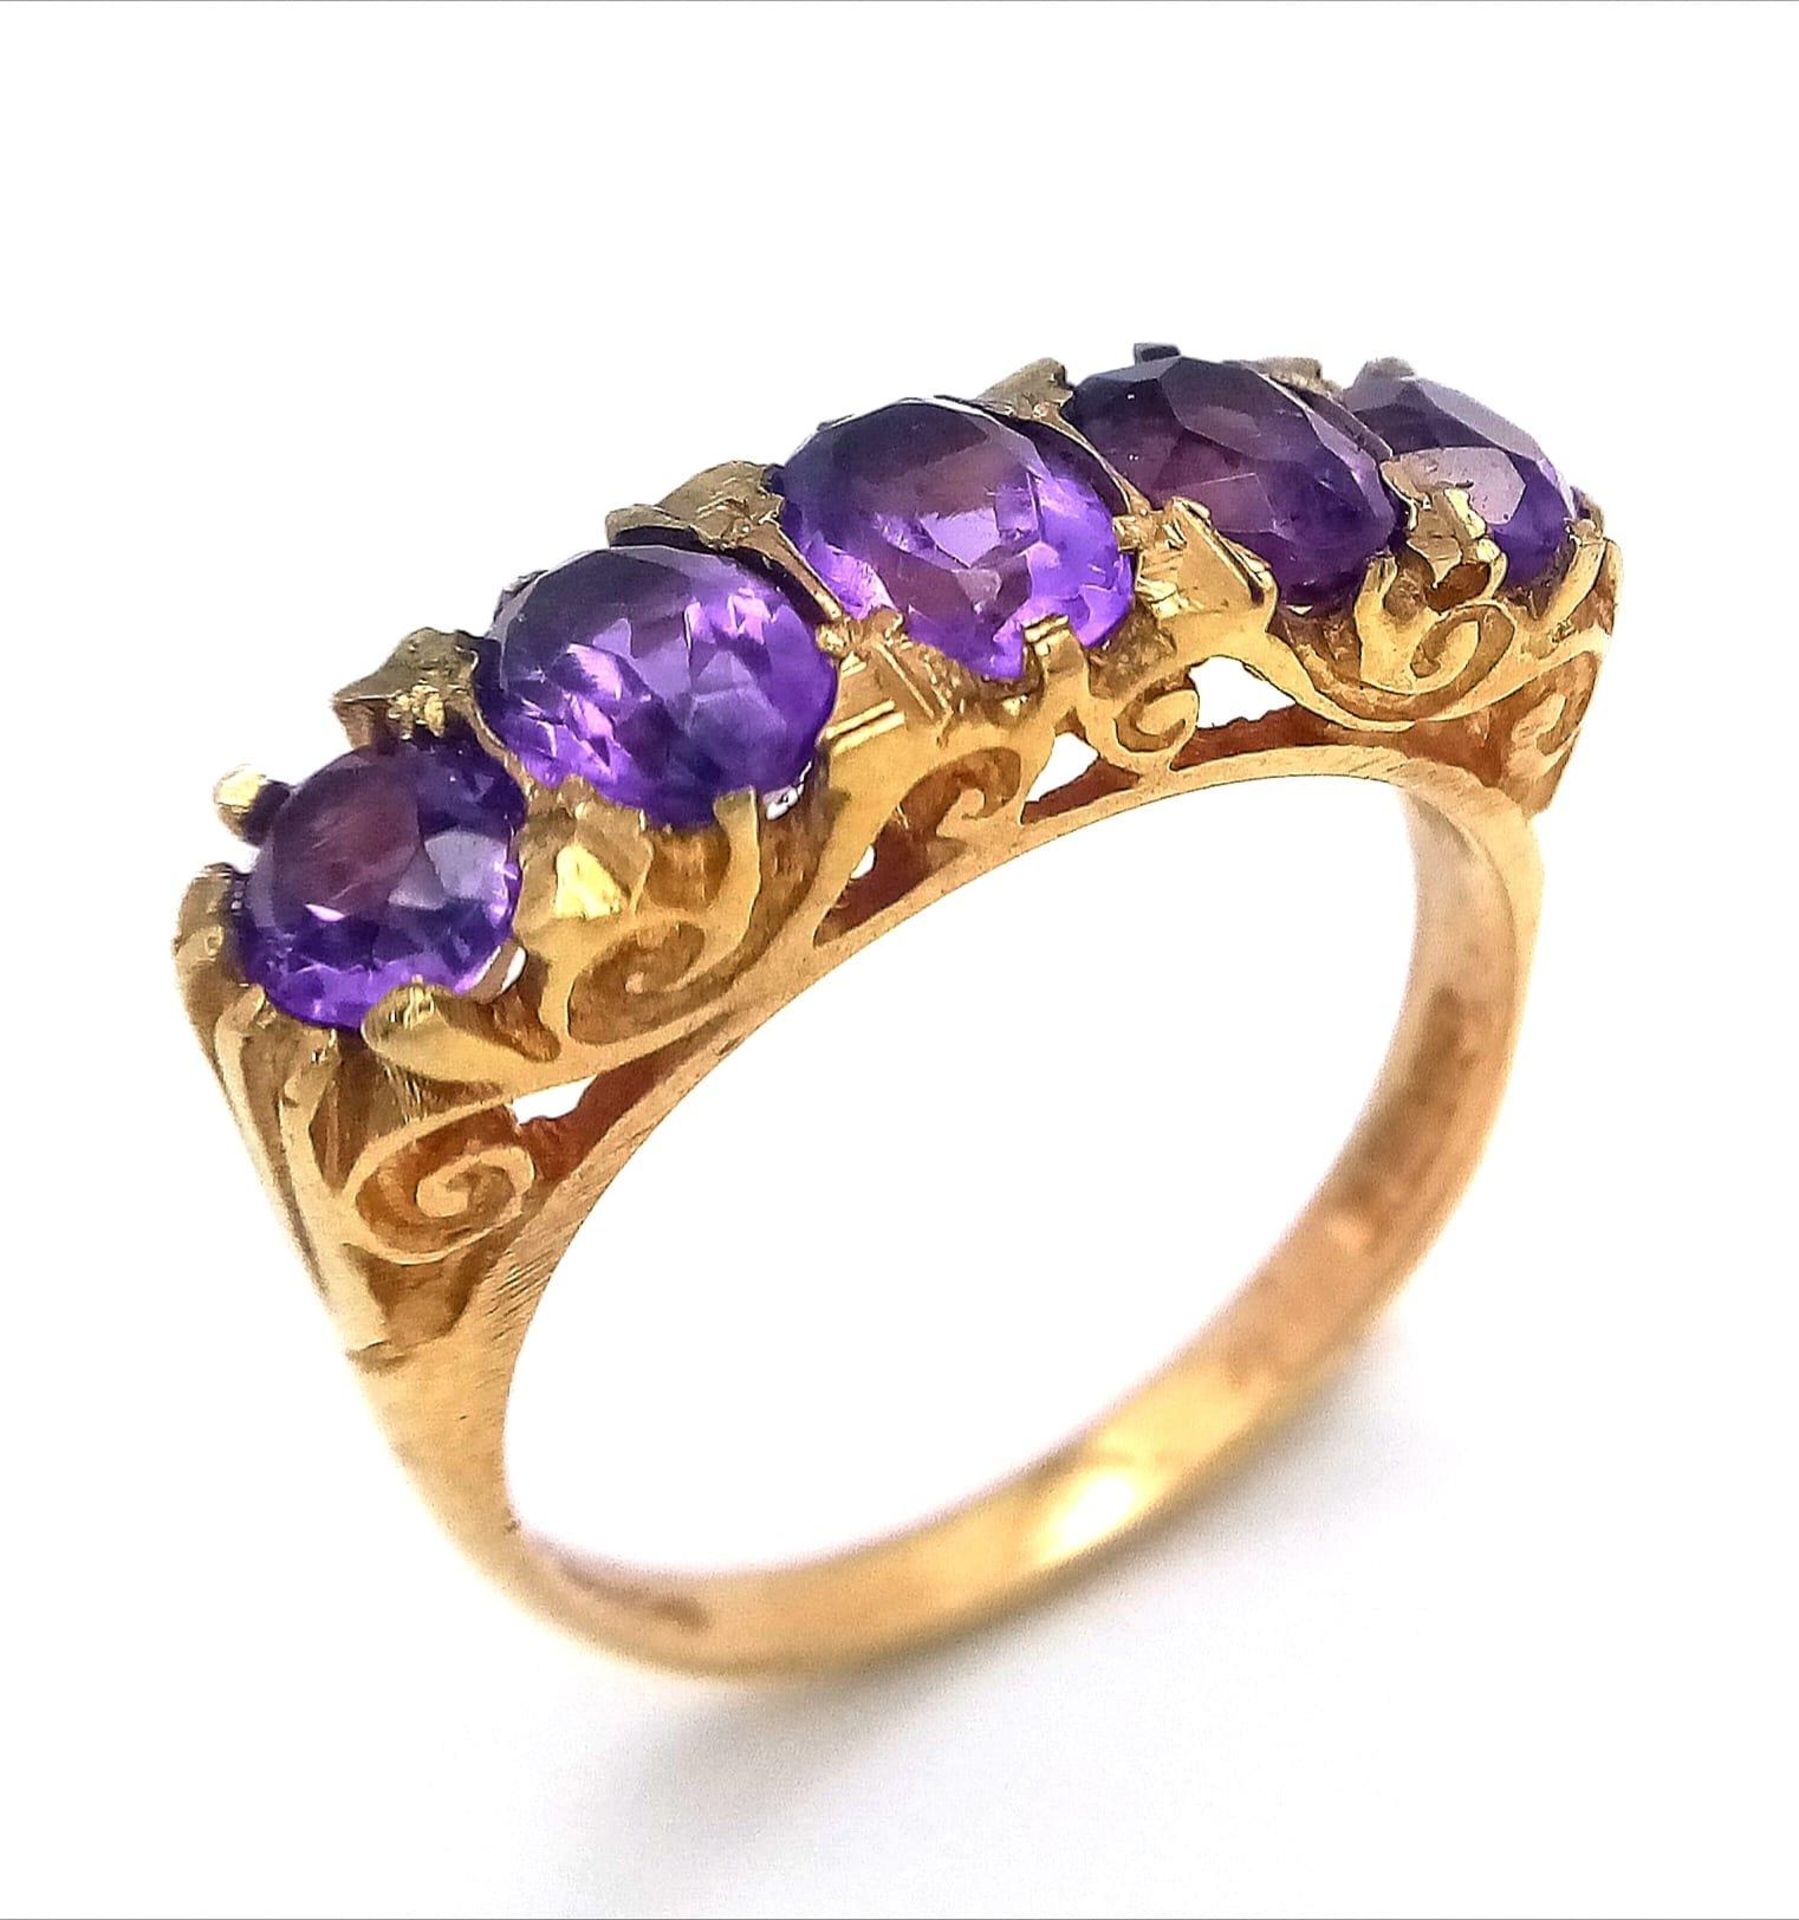 A HIGHLY ORNATE 5 AMETHYST STONE RING SET IN 9K GOLD . 4.2gms size O